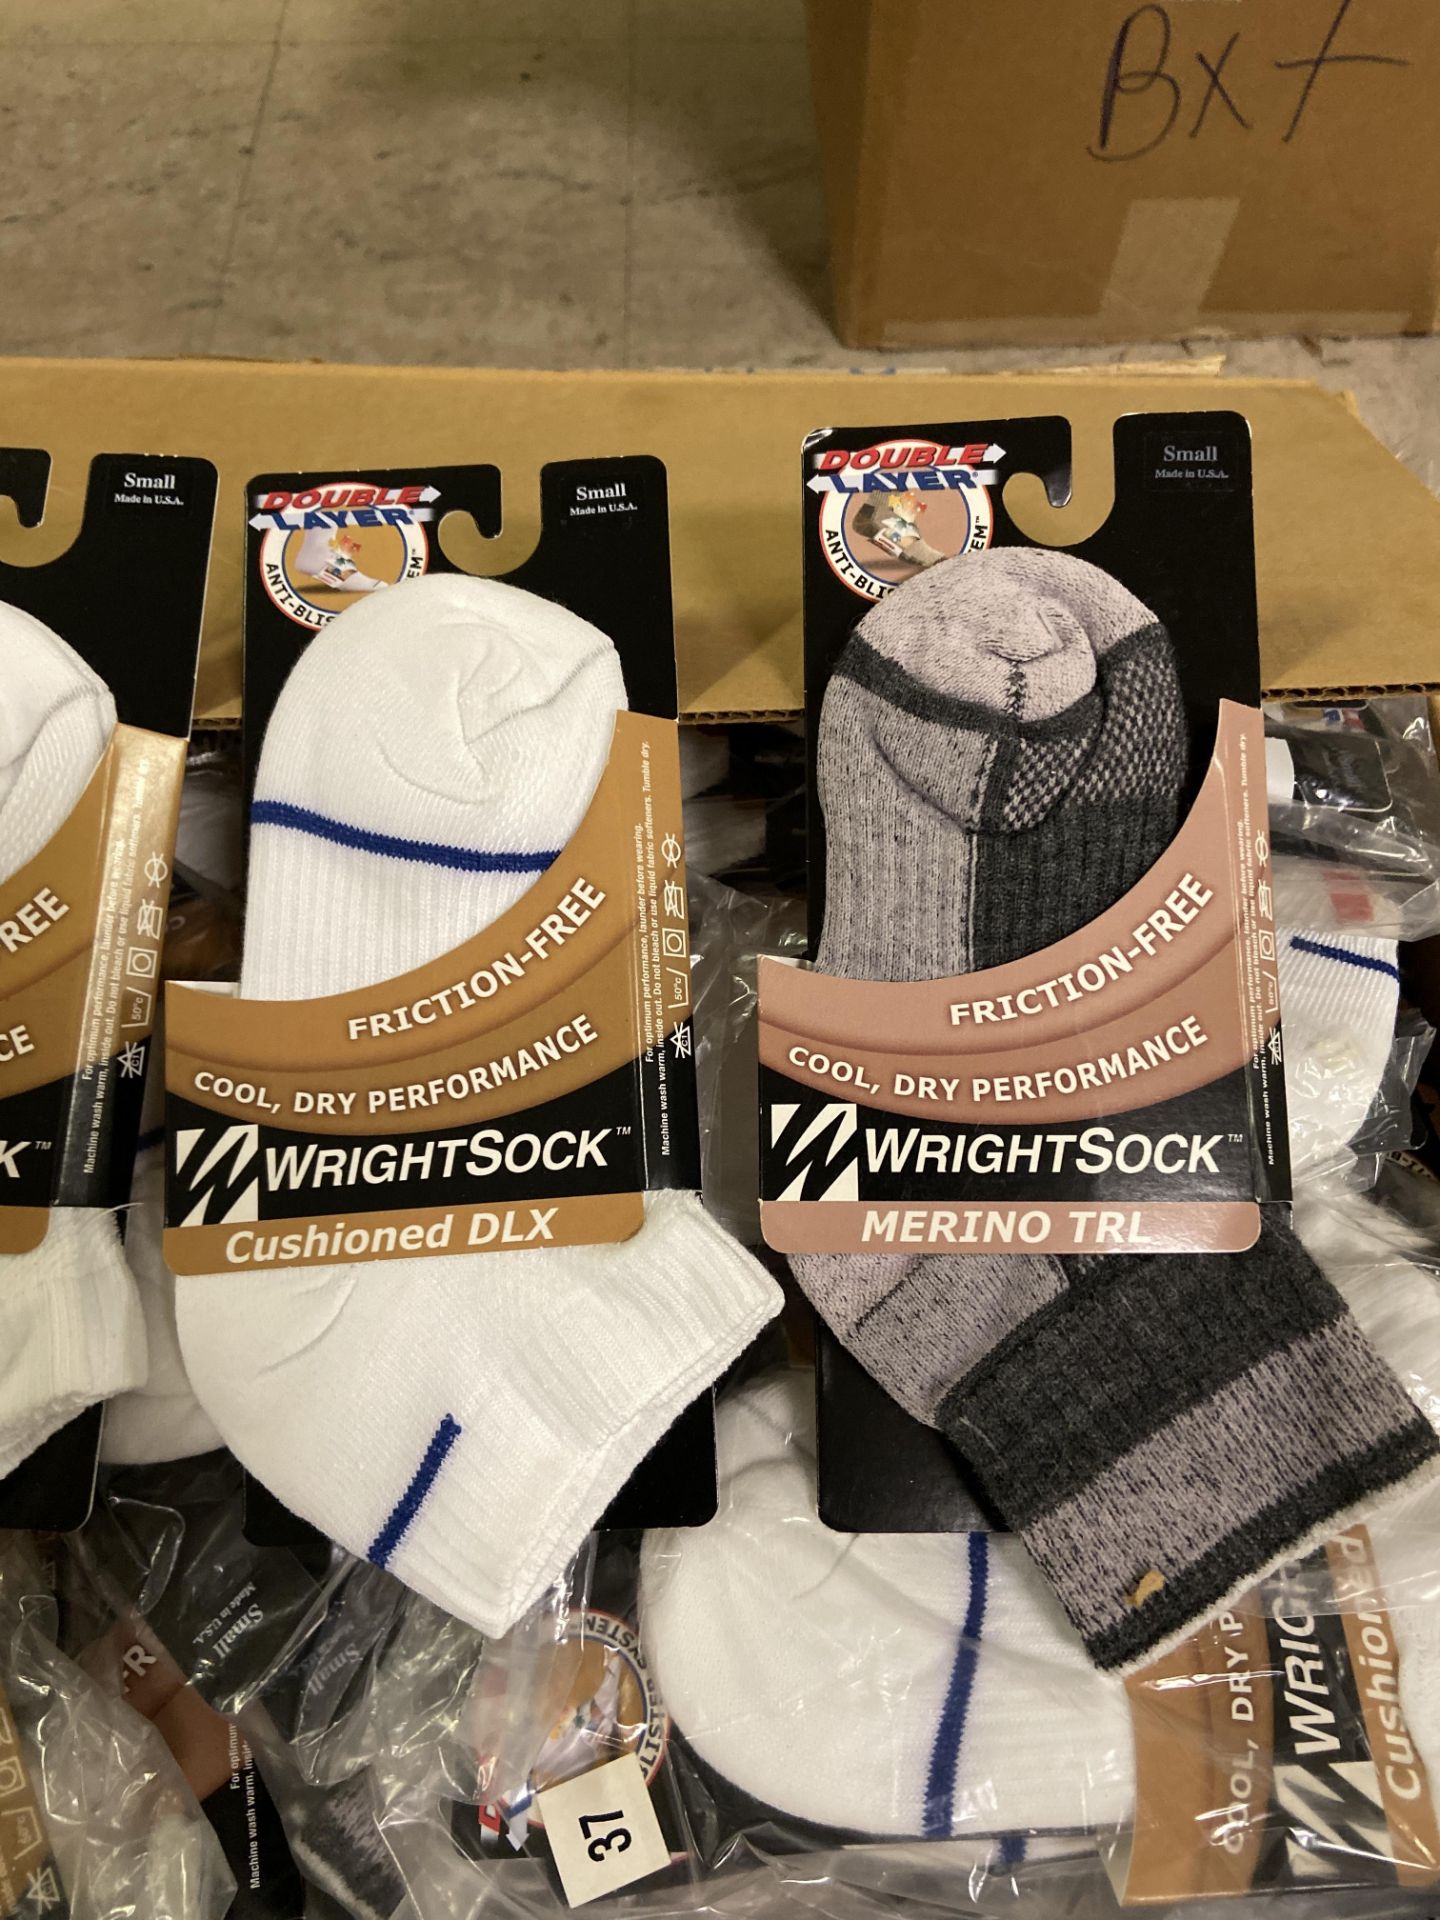 250+ packs of New Socks, Wrightsock Cushioned DLX and Merino TRL, Double Layer, Various Colors - Image 2 of 3